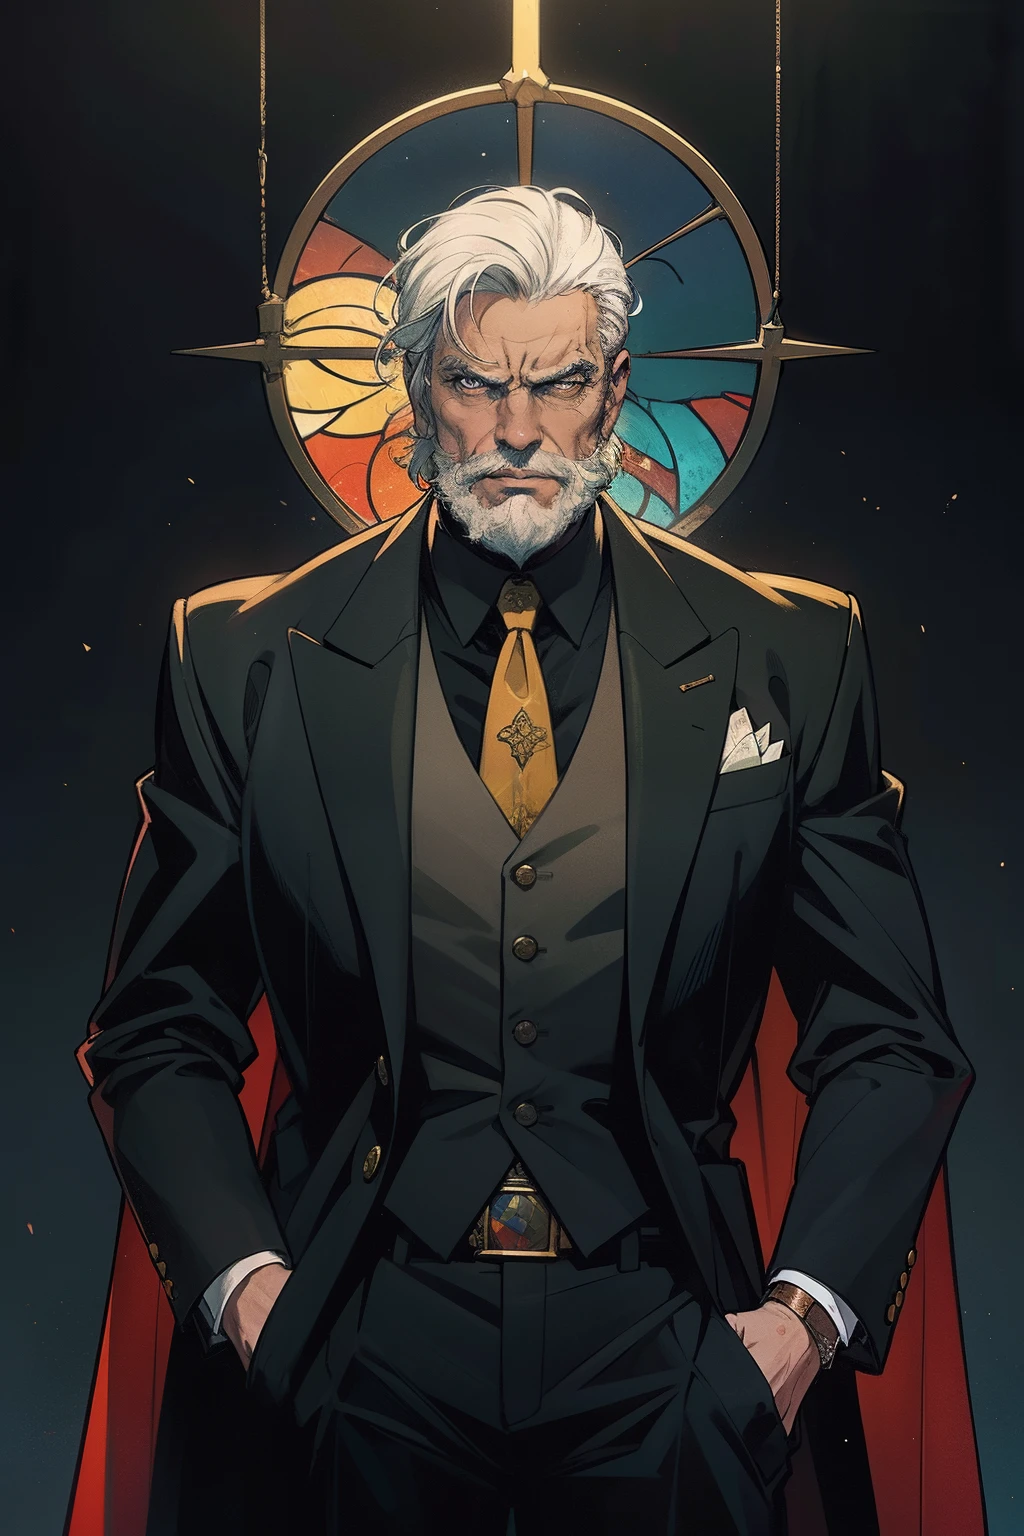 masterpiece:1.2, best quality, absurdres, stained glass background, dark lighting, action shot, gritty, man in a suit, SCI-FI, older man with combed white hair and beard, centered portrait, in the style of Kentaro Miura, (1male), masculine man, somber expression, comic, intricate, surreal, yellow filled-in halo behind his head as symbolism for the Hanged Man,